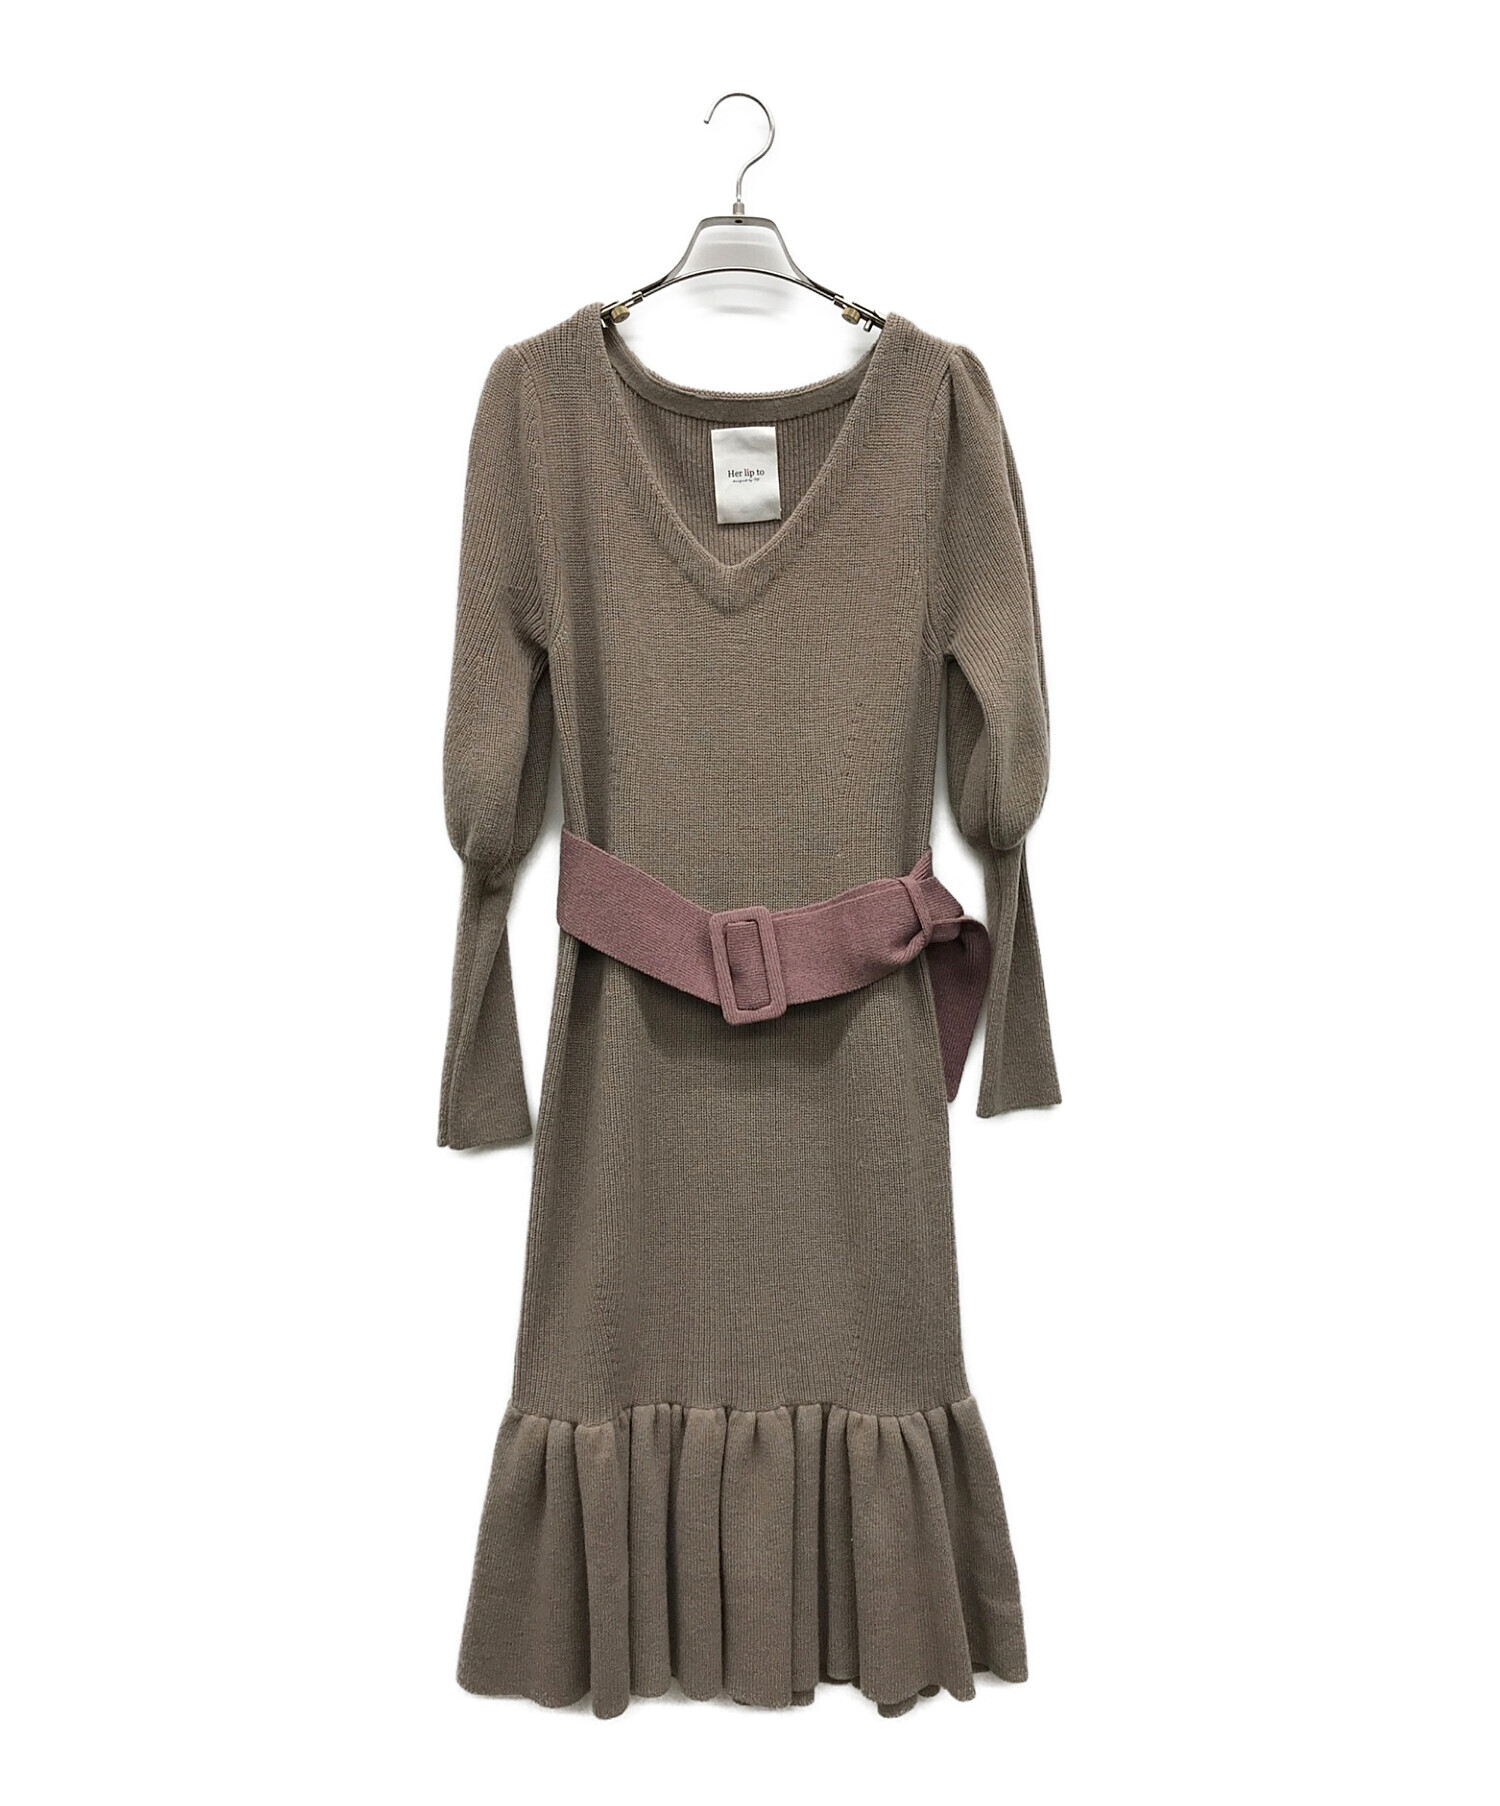 her lip to Two-Tone Belted Knit Dress